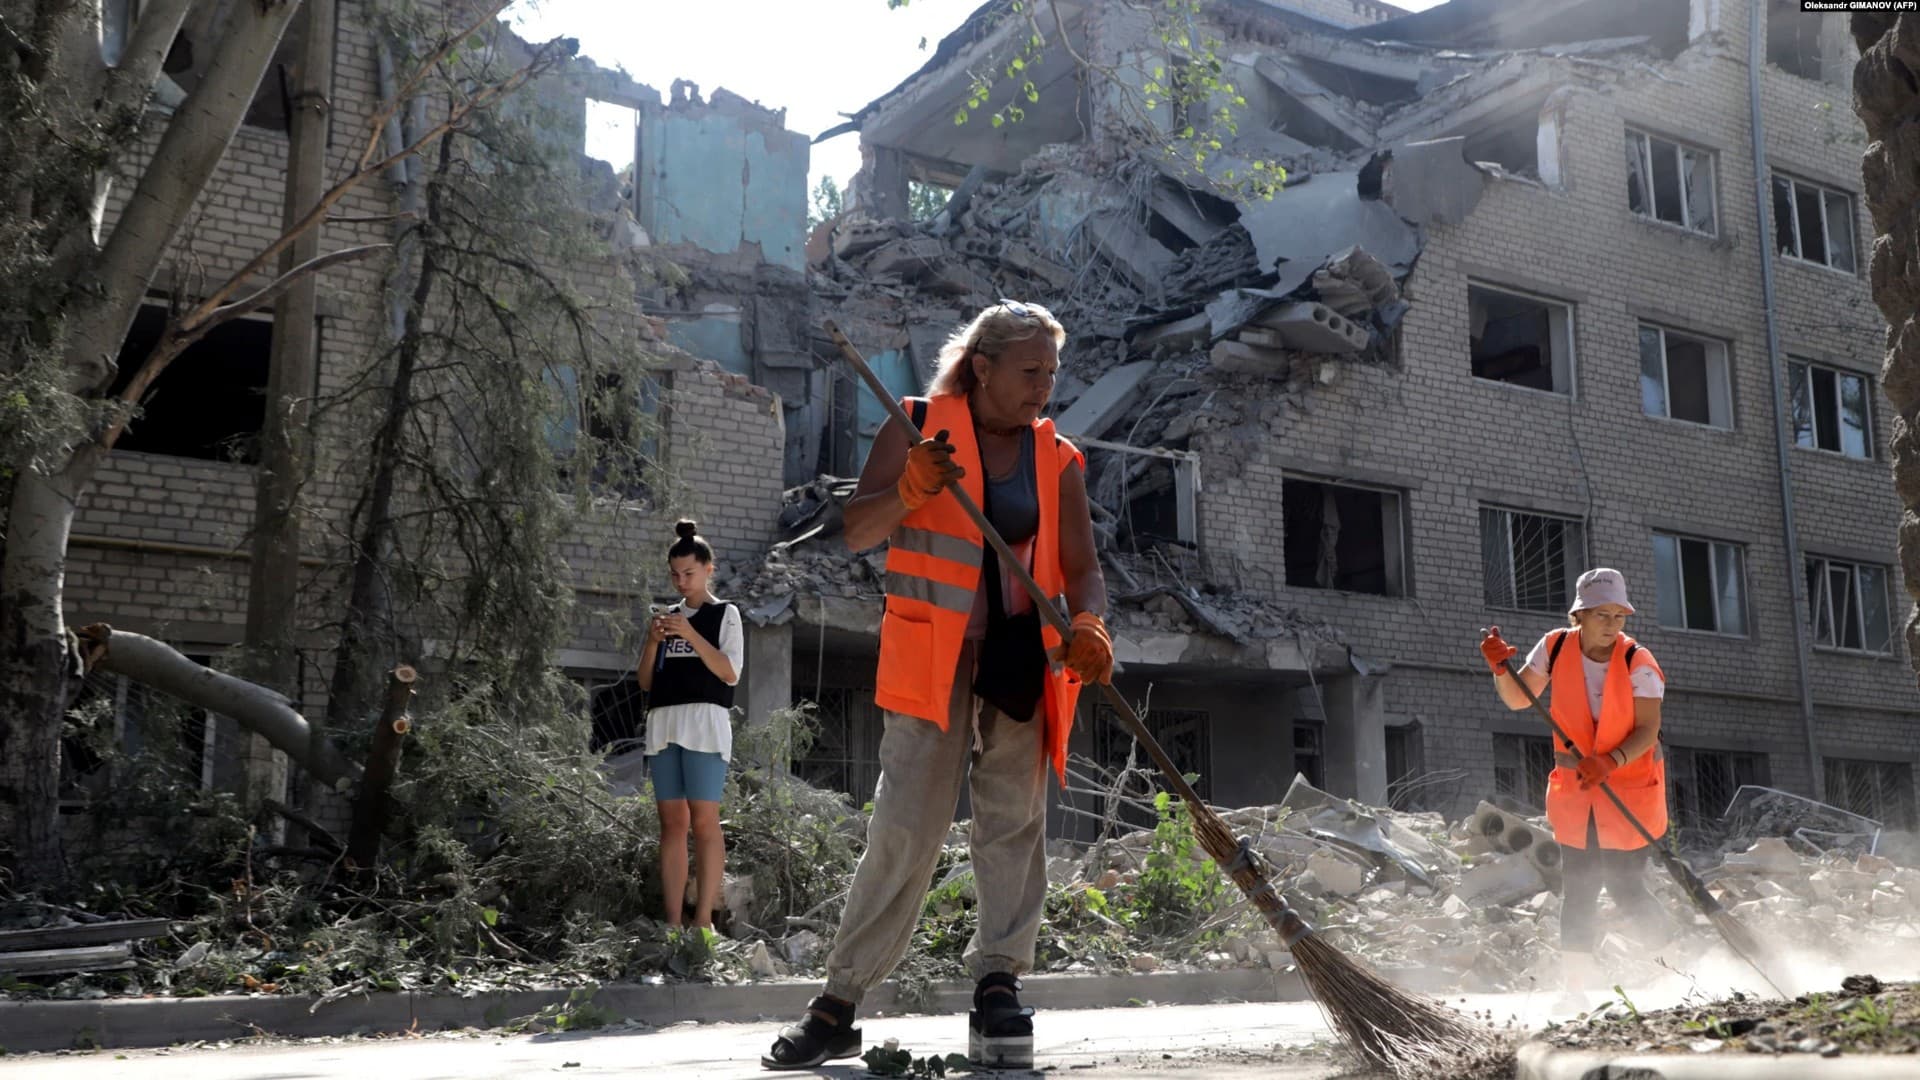 Workers clean up outside a building destroyed as a result of Russian shelling in Mykolayiv